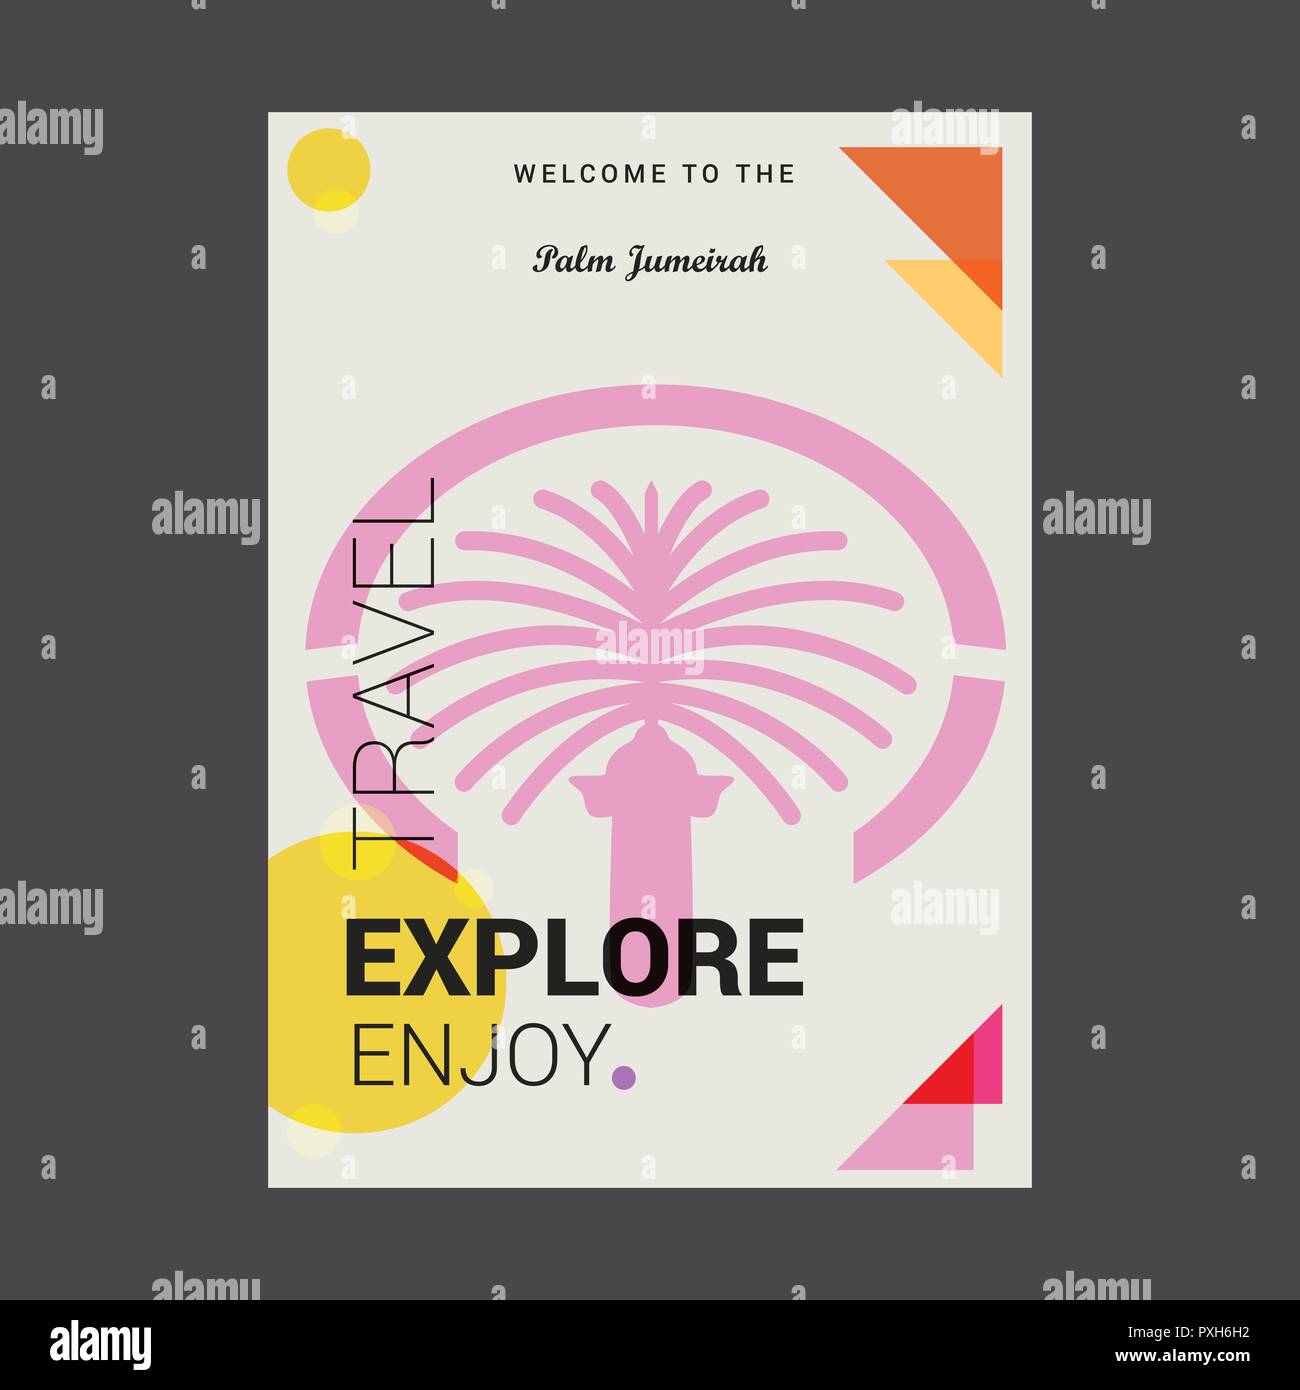 Welcome to The Palm Jumeirah Dubai, United Arab Emirates Explore, Travel Enjoy Poster Template Stock Vector